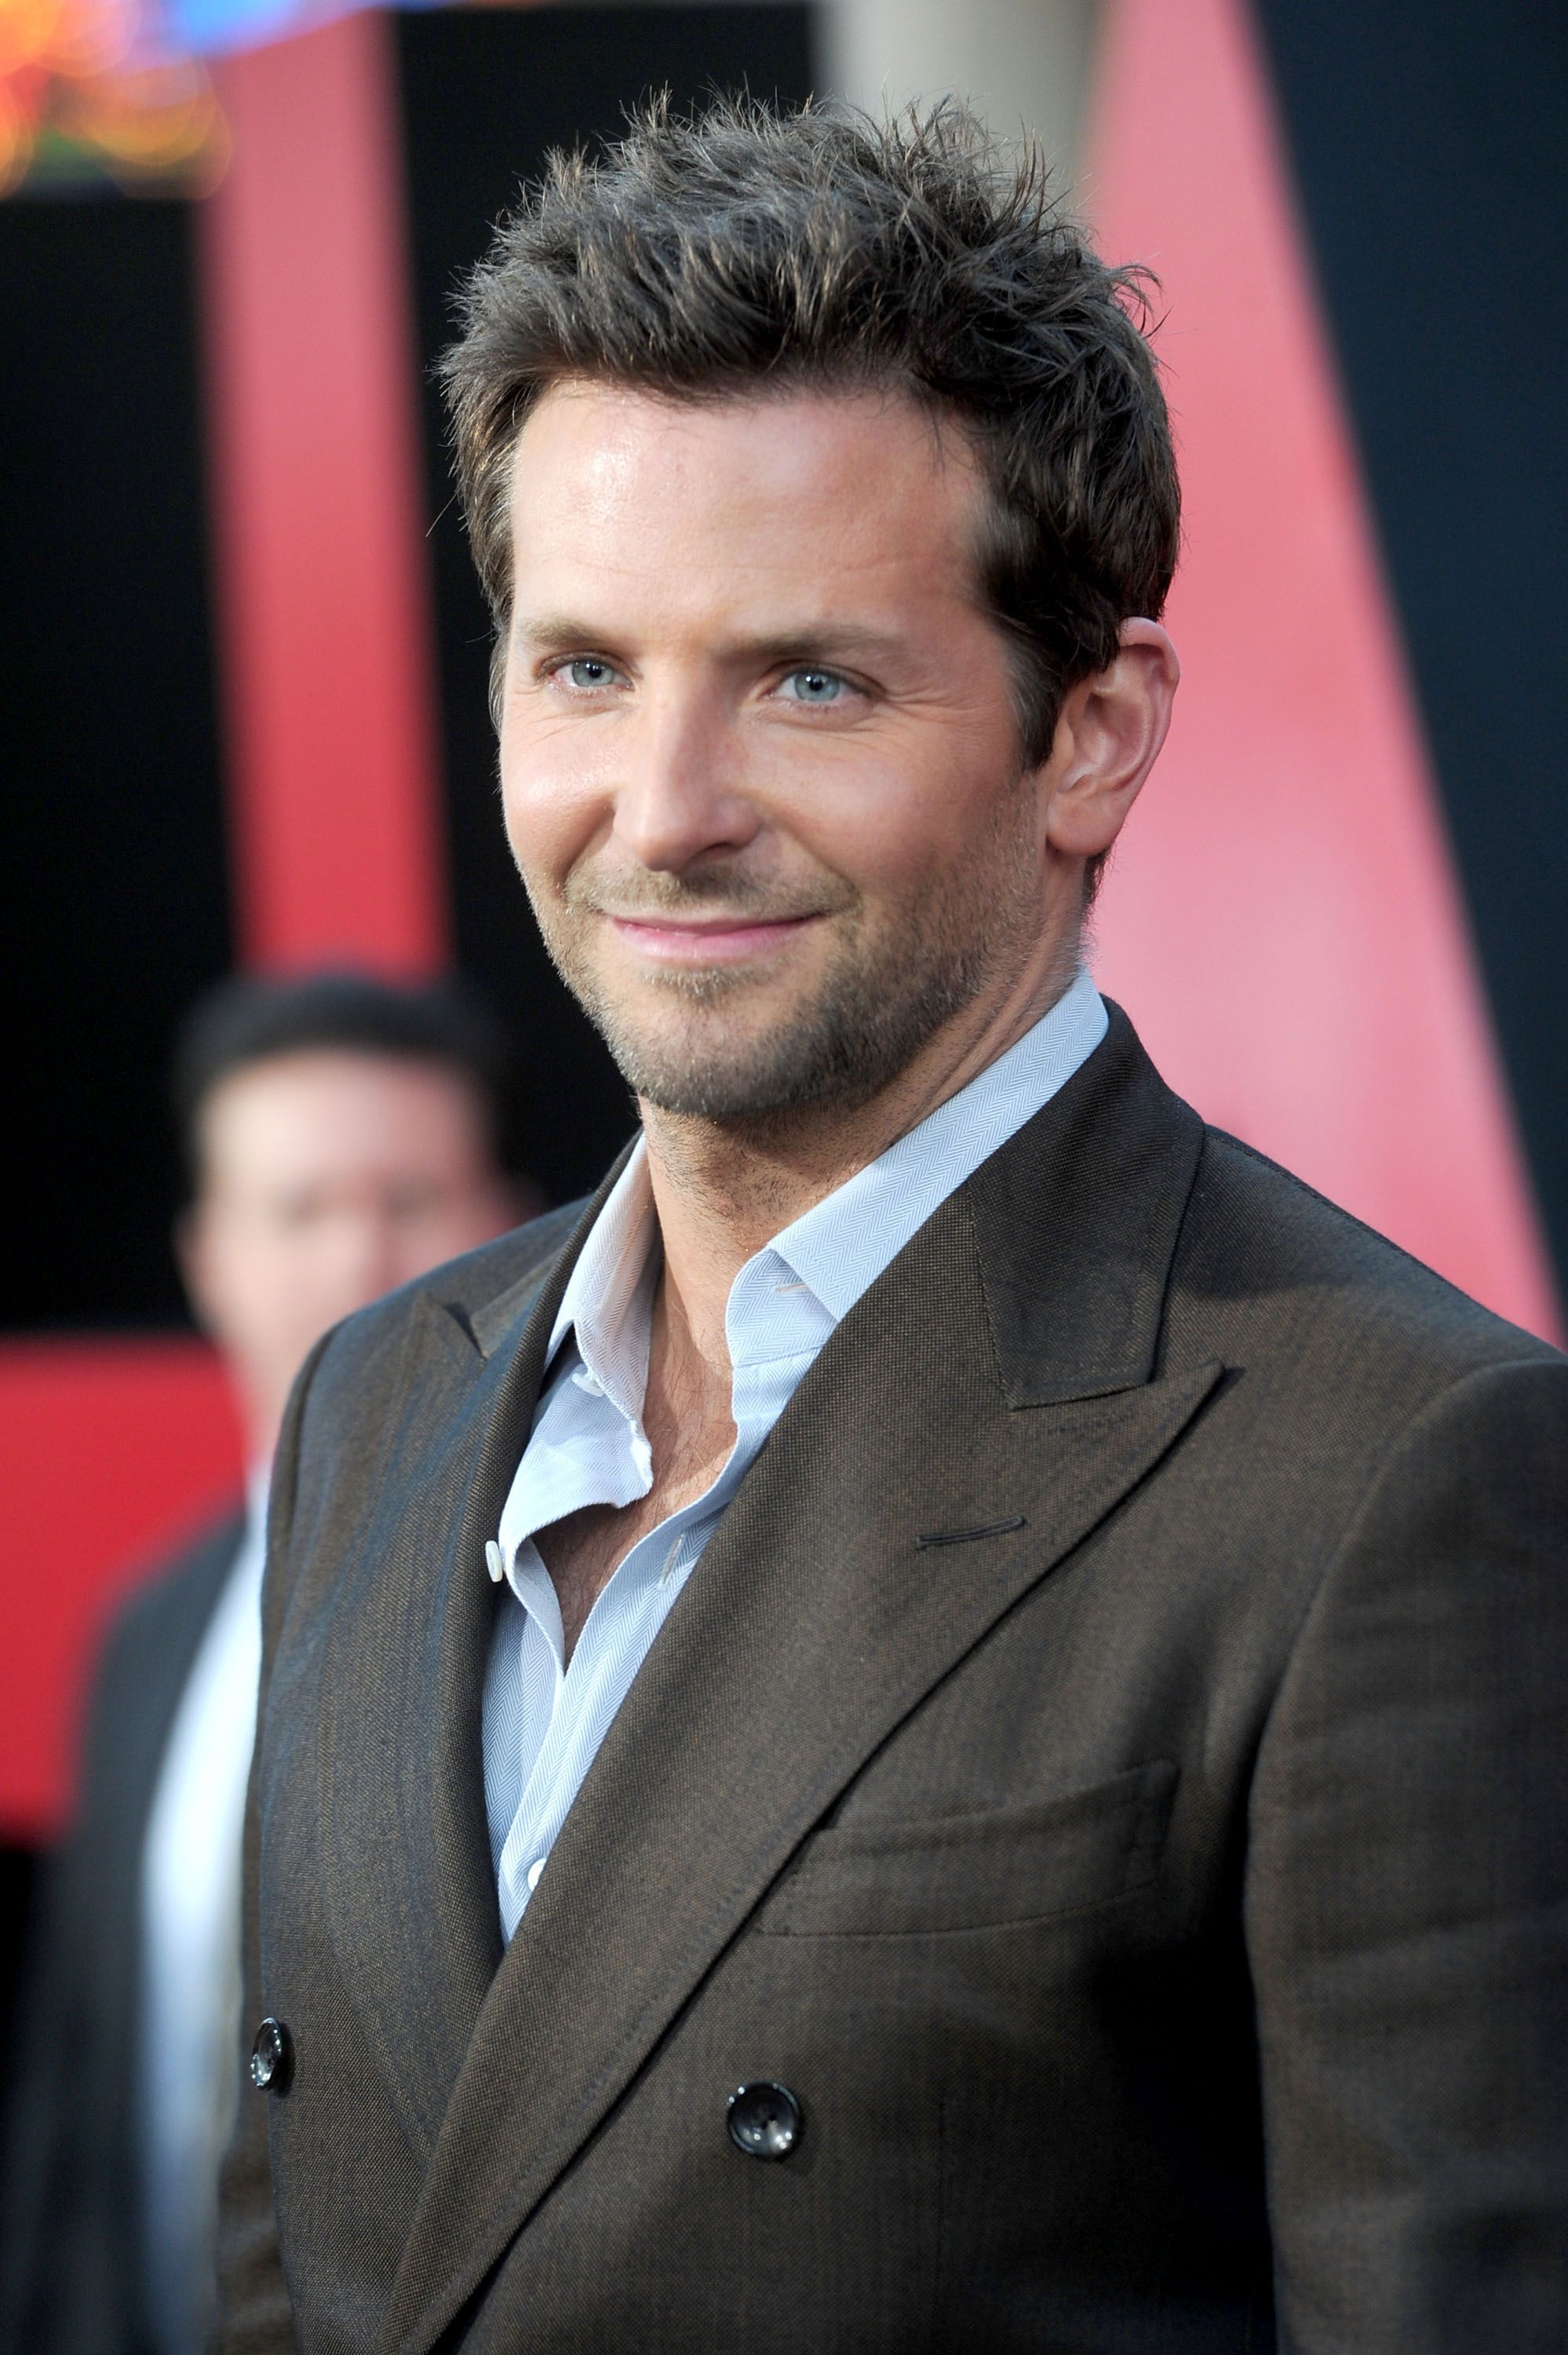 Bradley Cooper has impeccable timing (and taste in watches